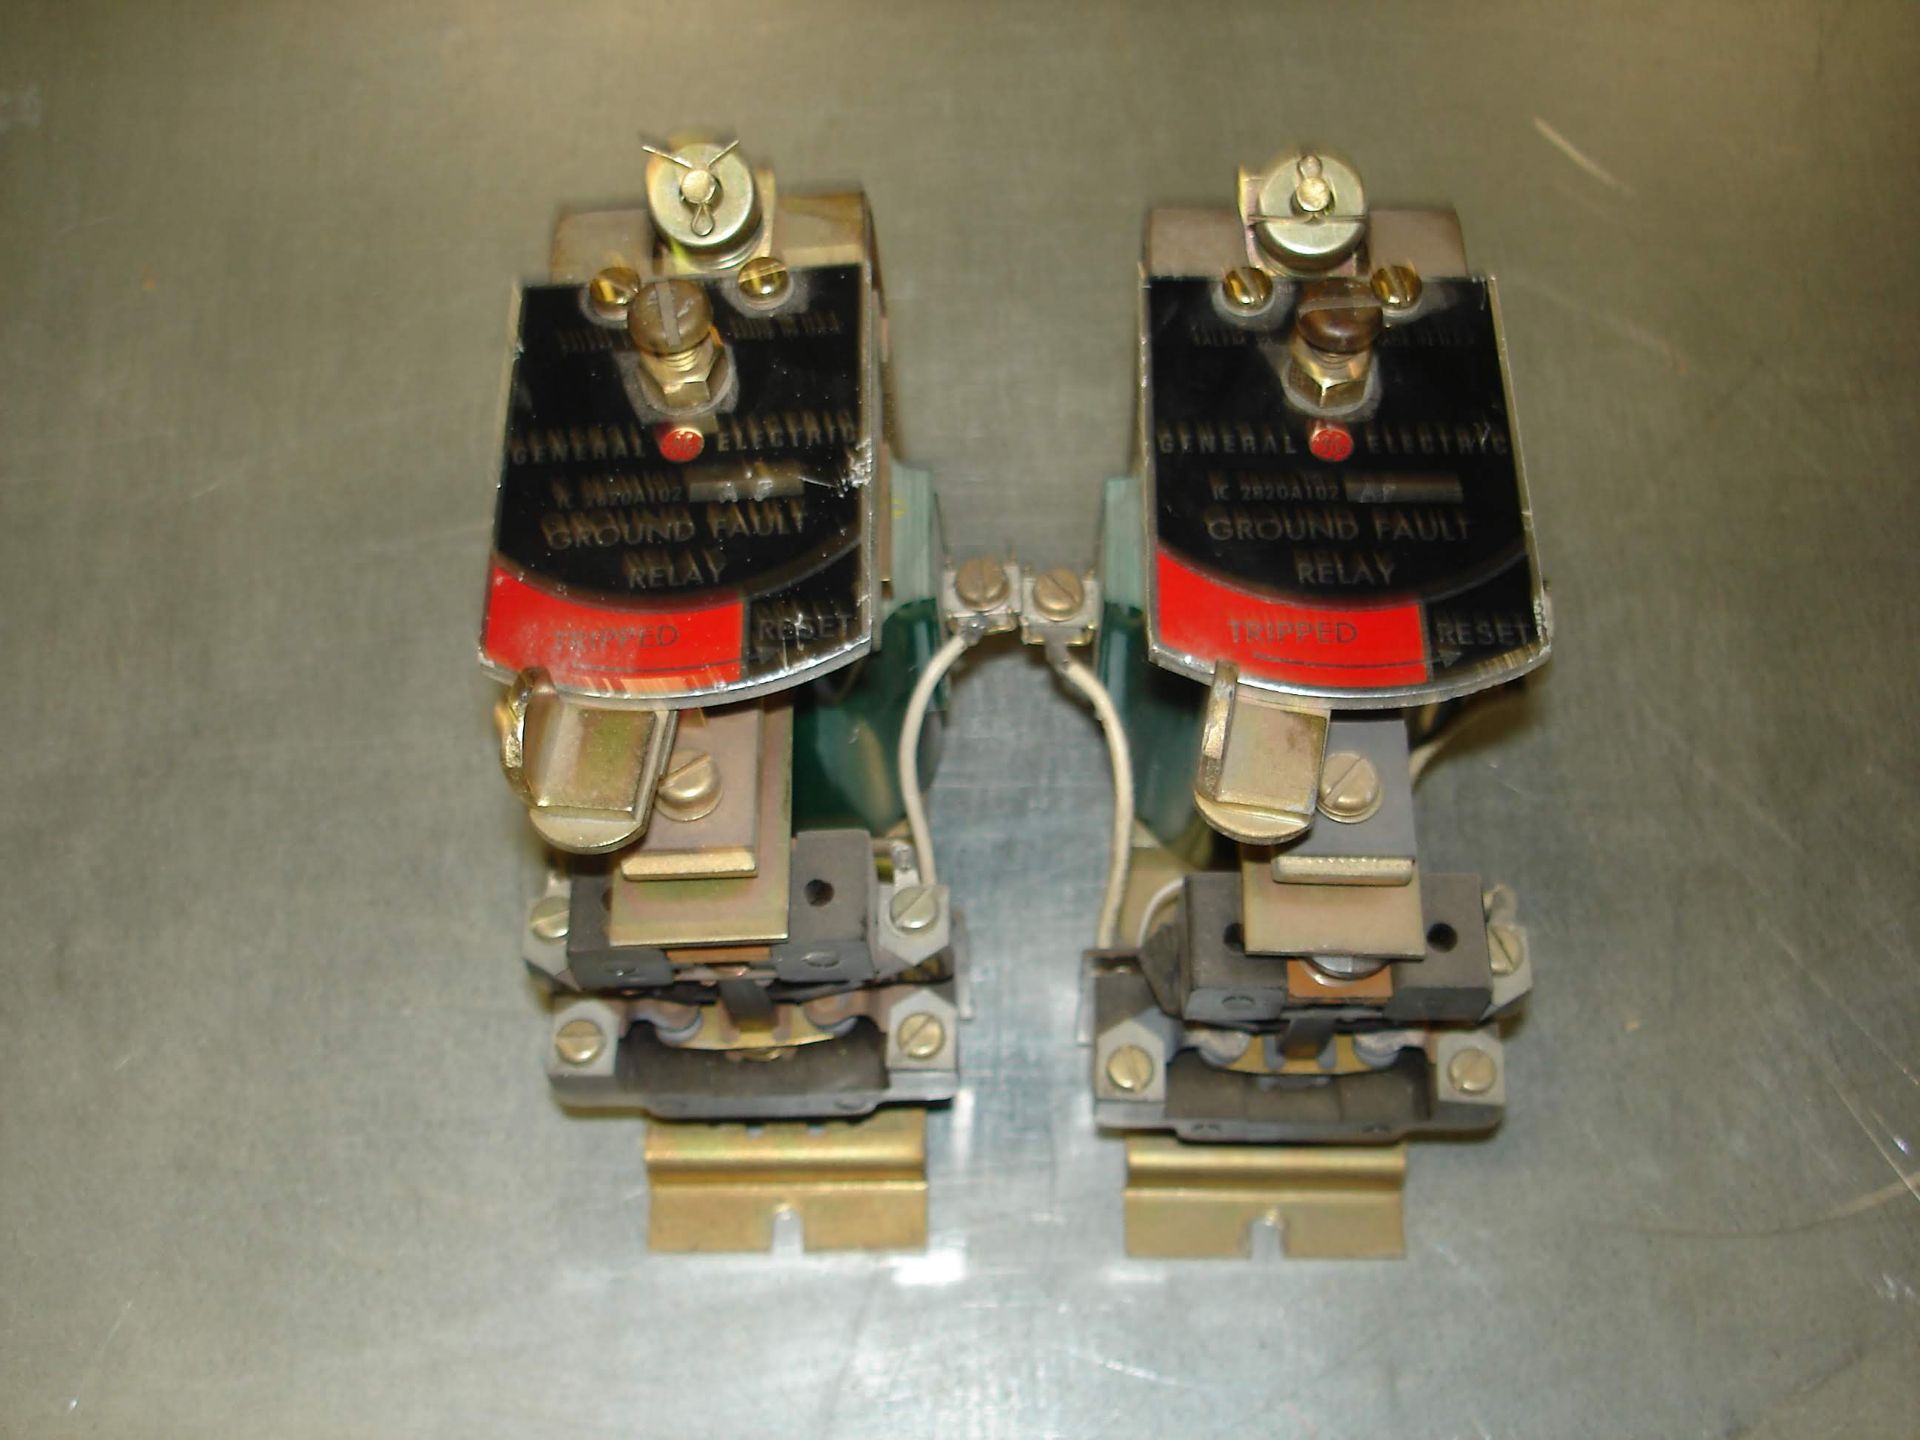 (2) IC2820A102AF GE GROUND FAULT RELAY USED. Pickup your lot(s) for free! Shipping is available